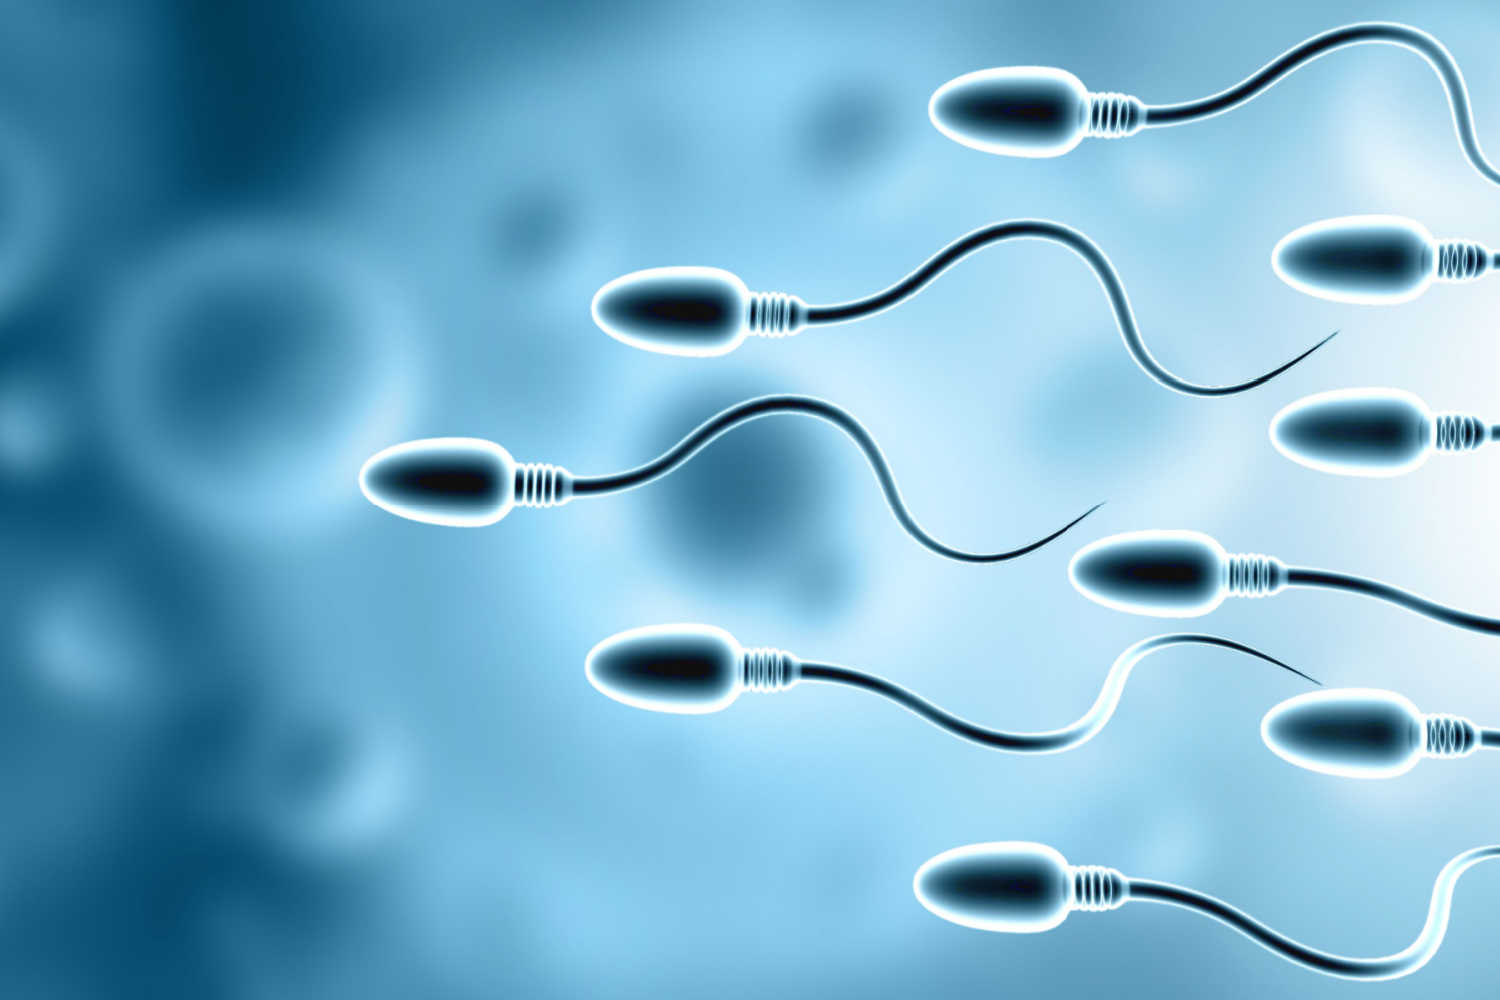 Preconception Testing For Men – Why It is Needed and Complete List of Tests